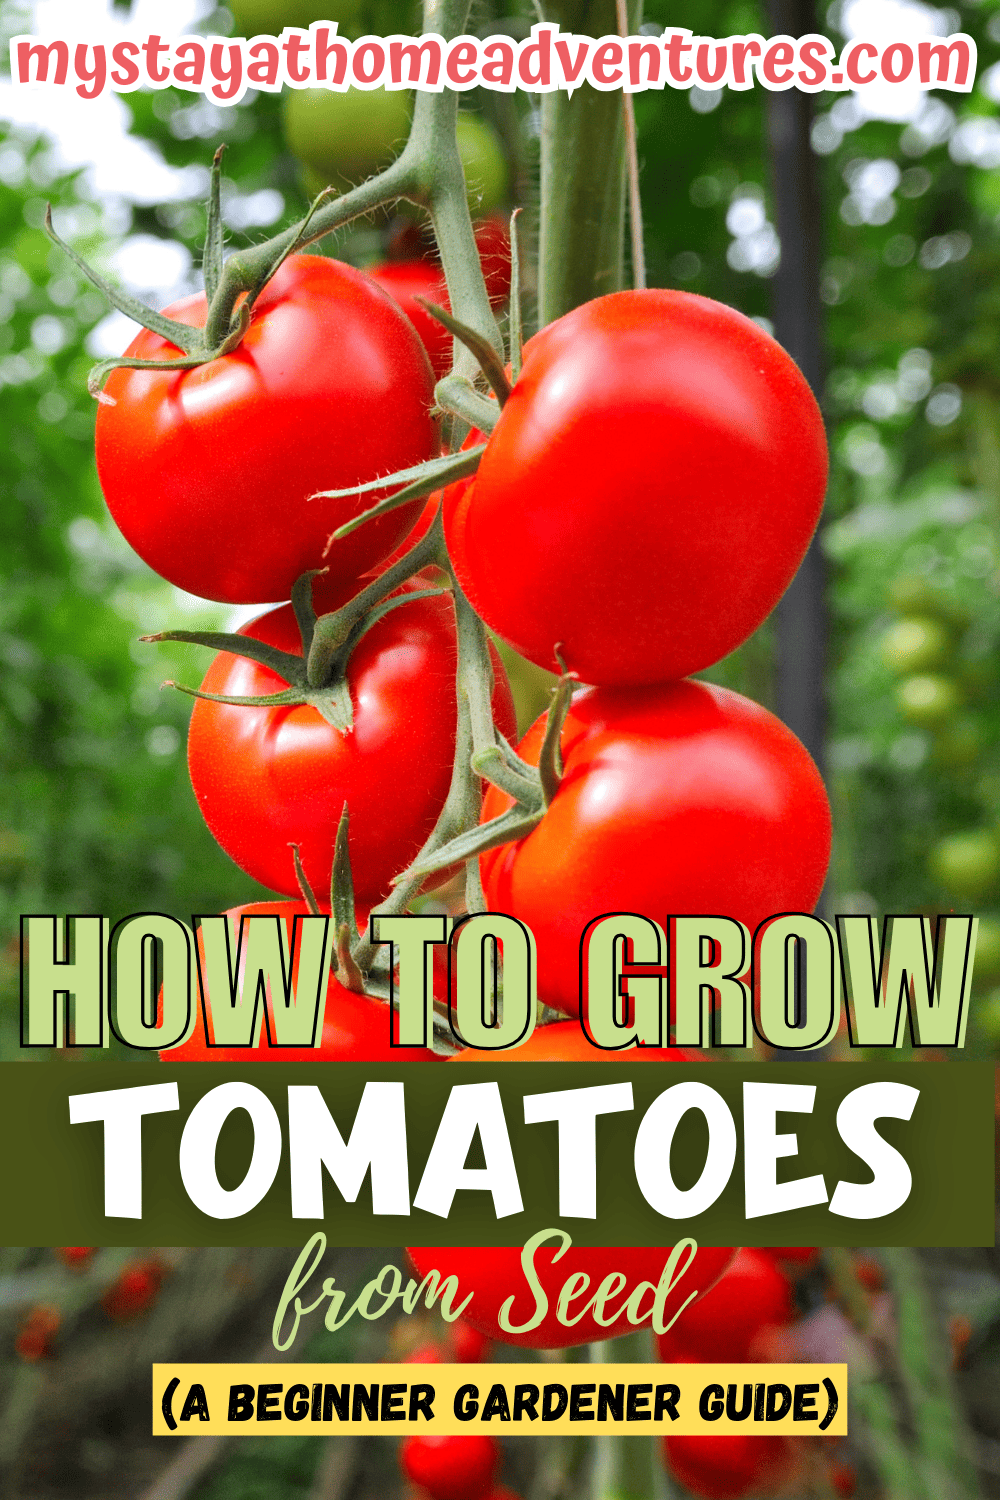 How to Grow Tomatoes from Seed (A Beginner Gardener Guide)